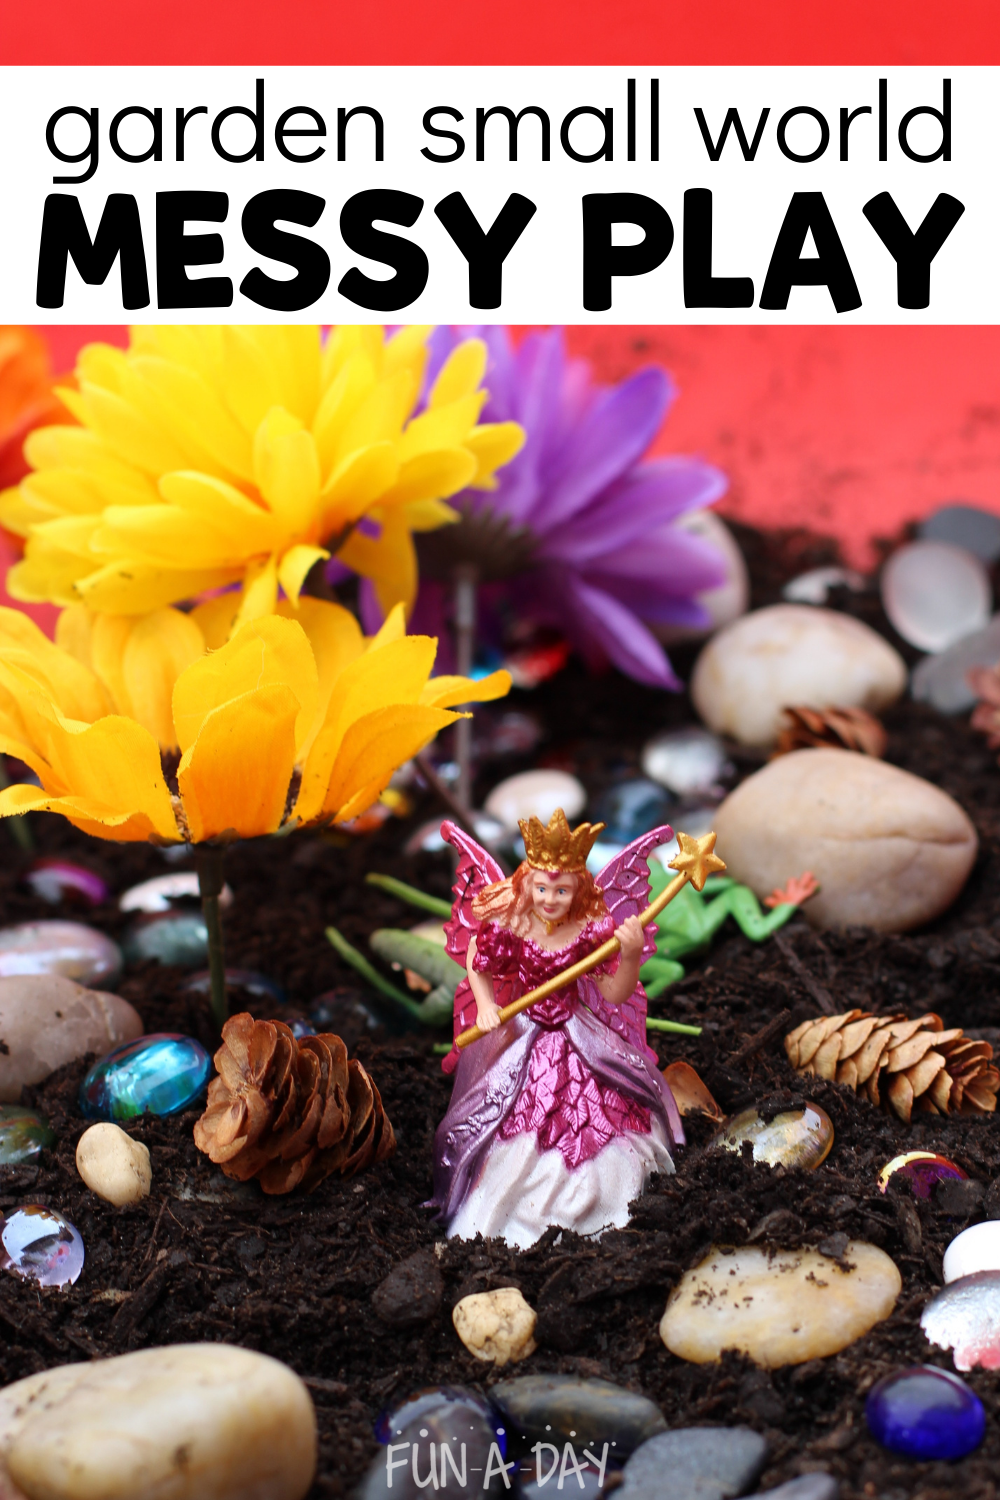 Fairy toy in dirt, surrounded by rocks, fake flowers, pine cones, and glass gems. Text reads garden small world messy play.